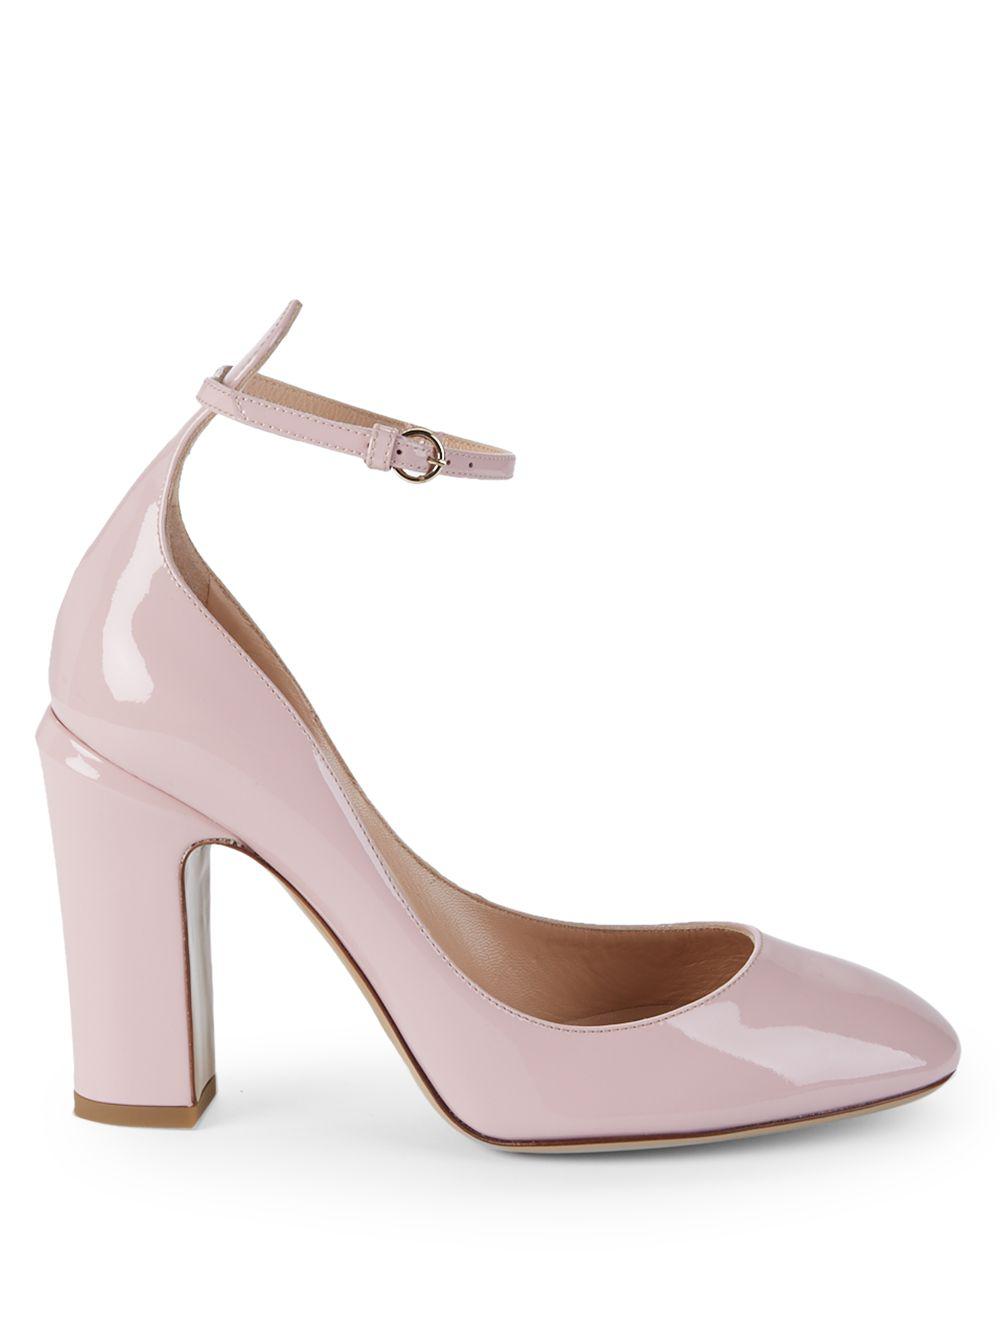 Valentino Tango Patent Leather Pumps in Light Pink (Pink) - Lyst